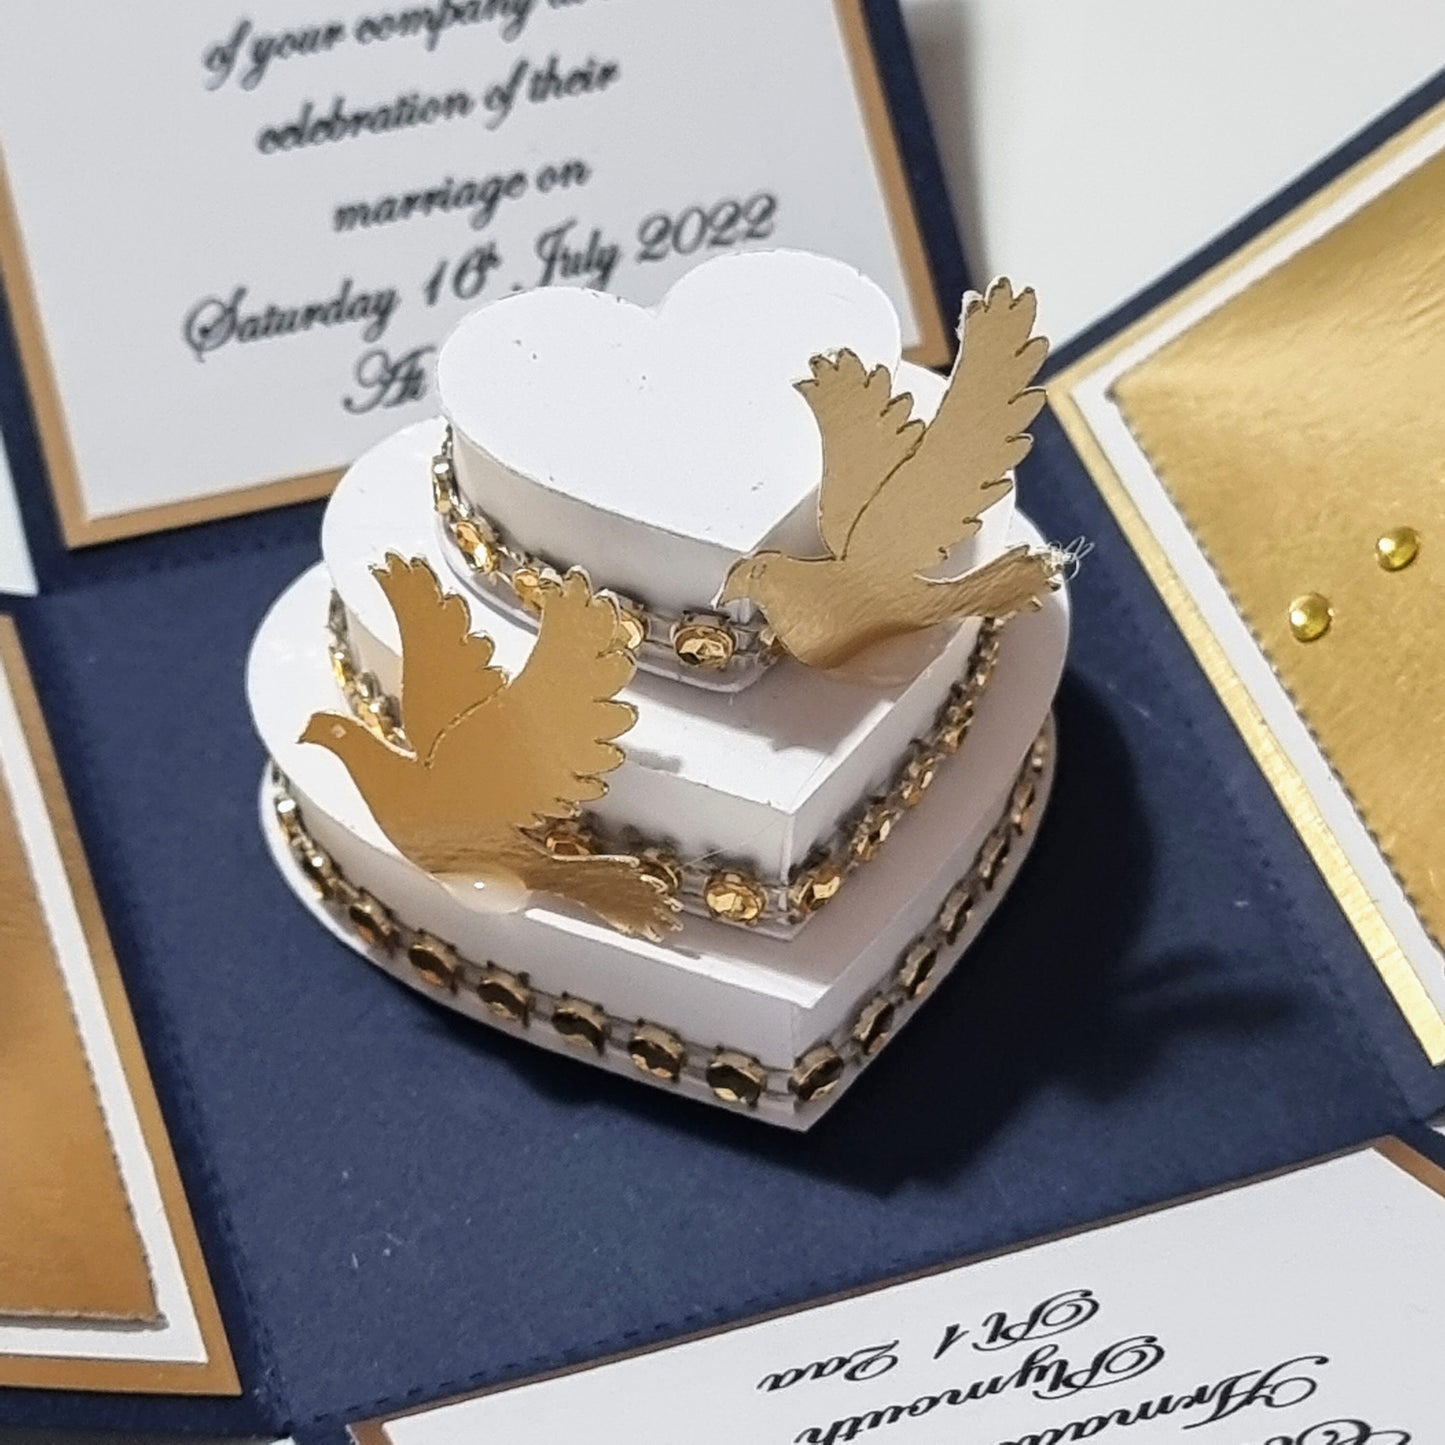 Hearts & Doves Range in Classic Navy Blue and Gold. Unique 3'' Square Exploding Wedding Invitation Box featuring two fixed panels, One with Invitation details and the other with Venue details. Gold Doves sit on the three tier cake.